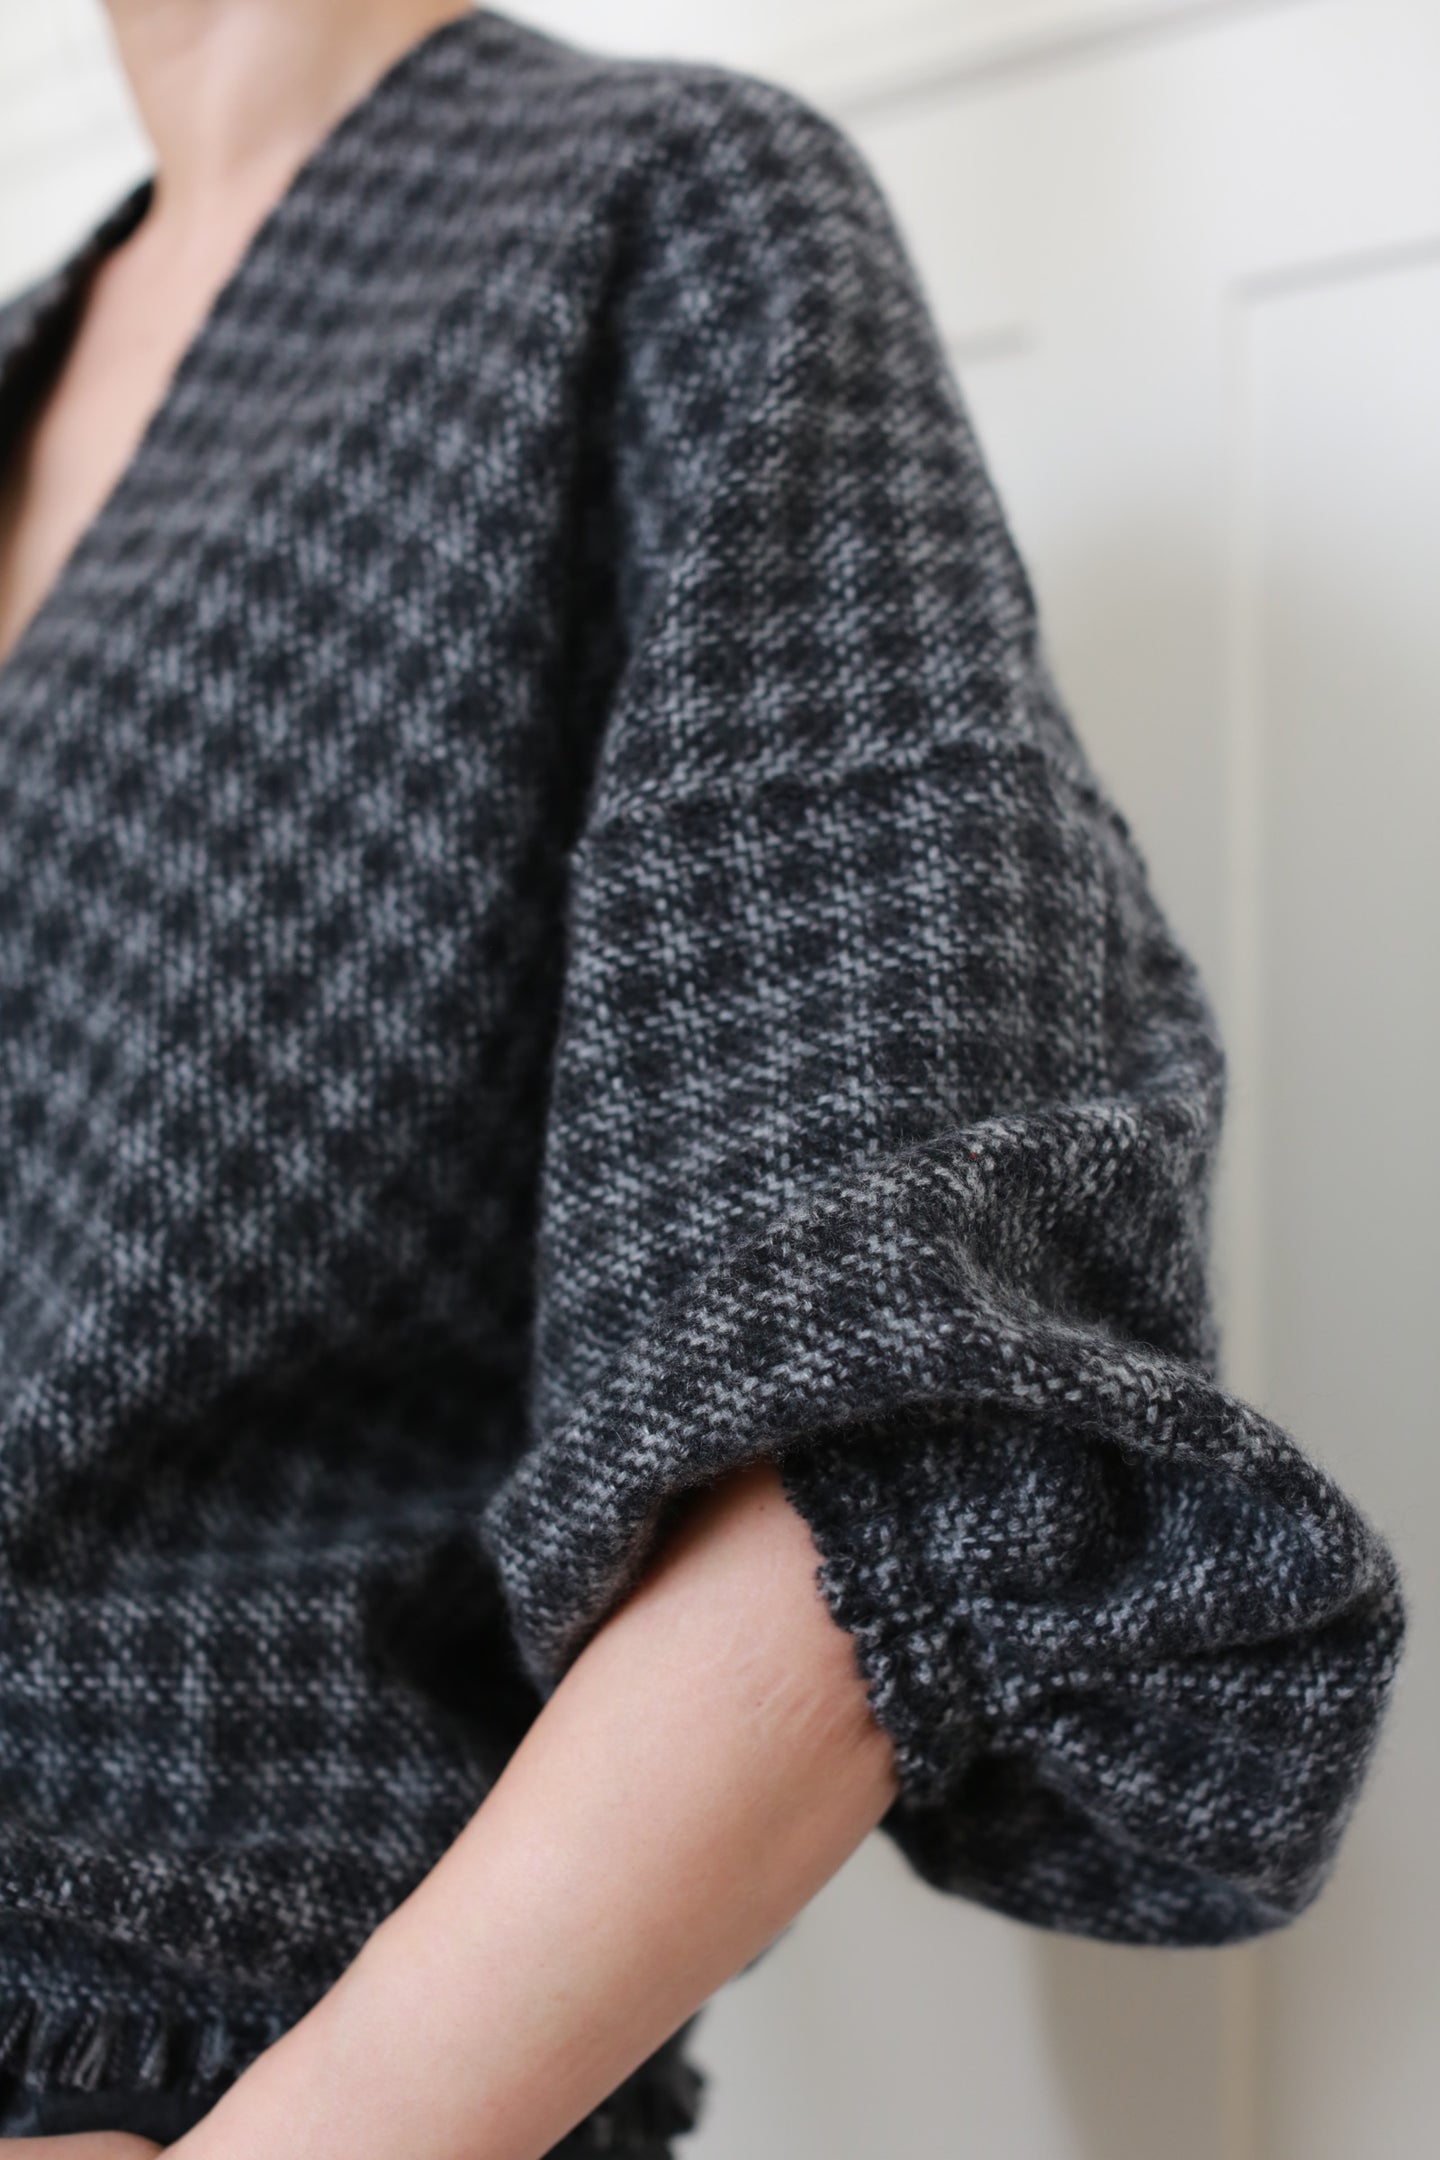 Cashmere House Cardi | Charcoal Houndstooth